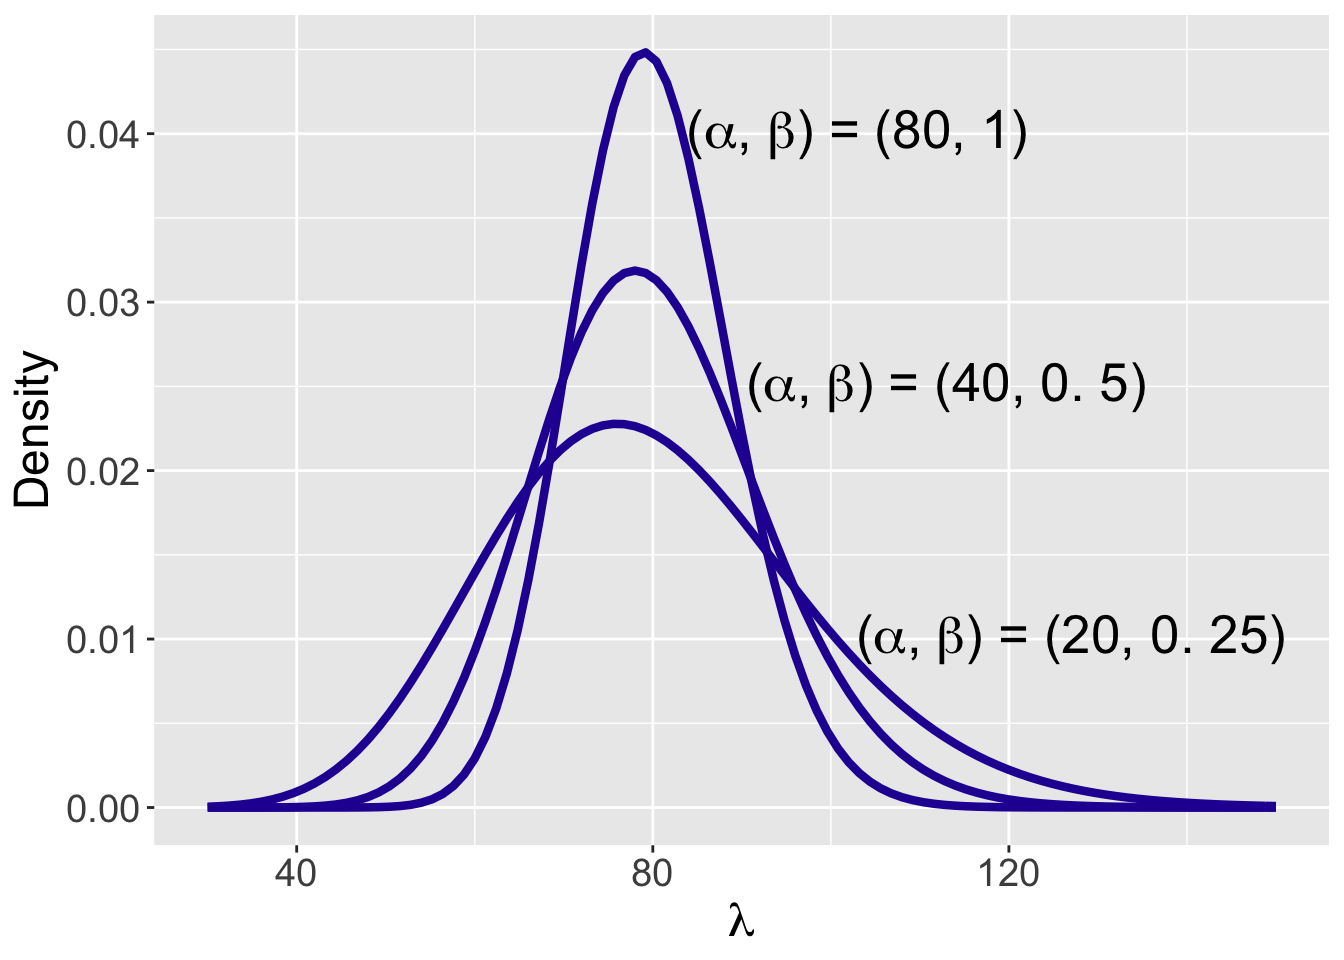 Three Gamma($\alpha, \beta$) plausible prior distributions for the average number of weekday visits to the website.